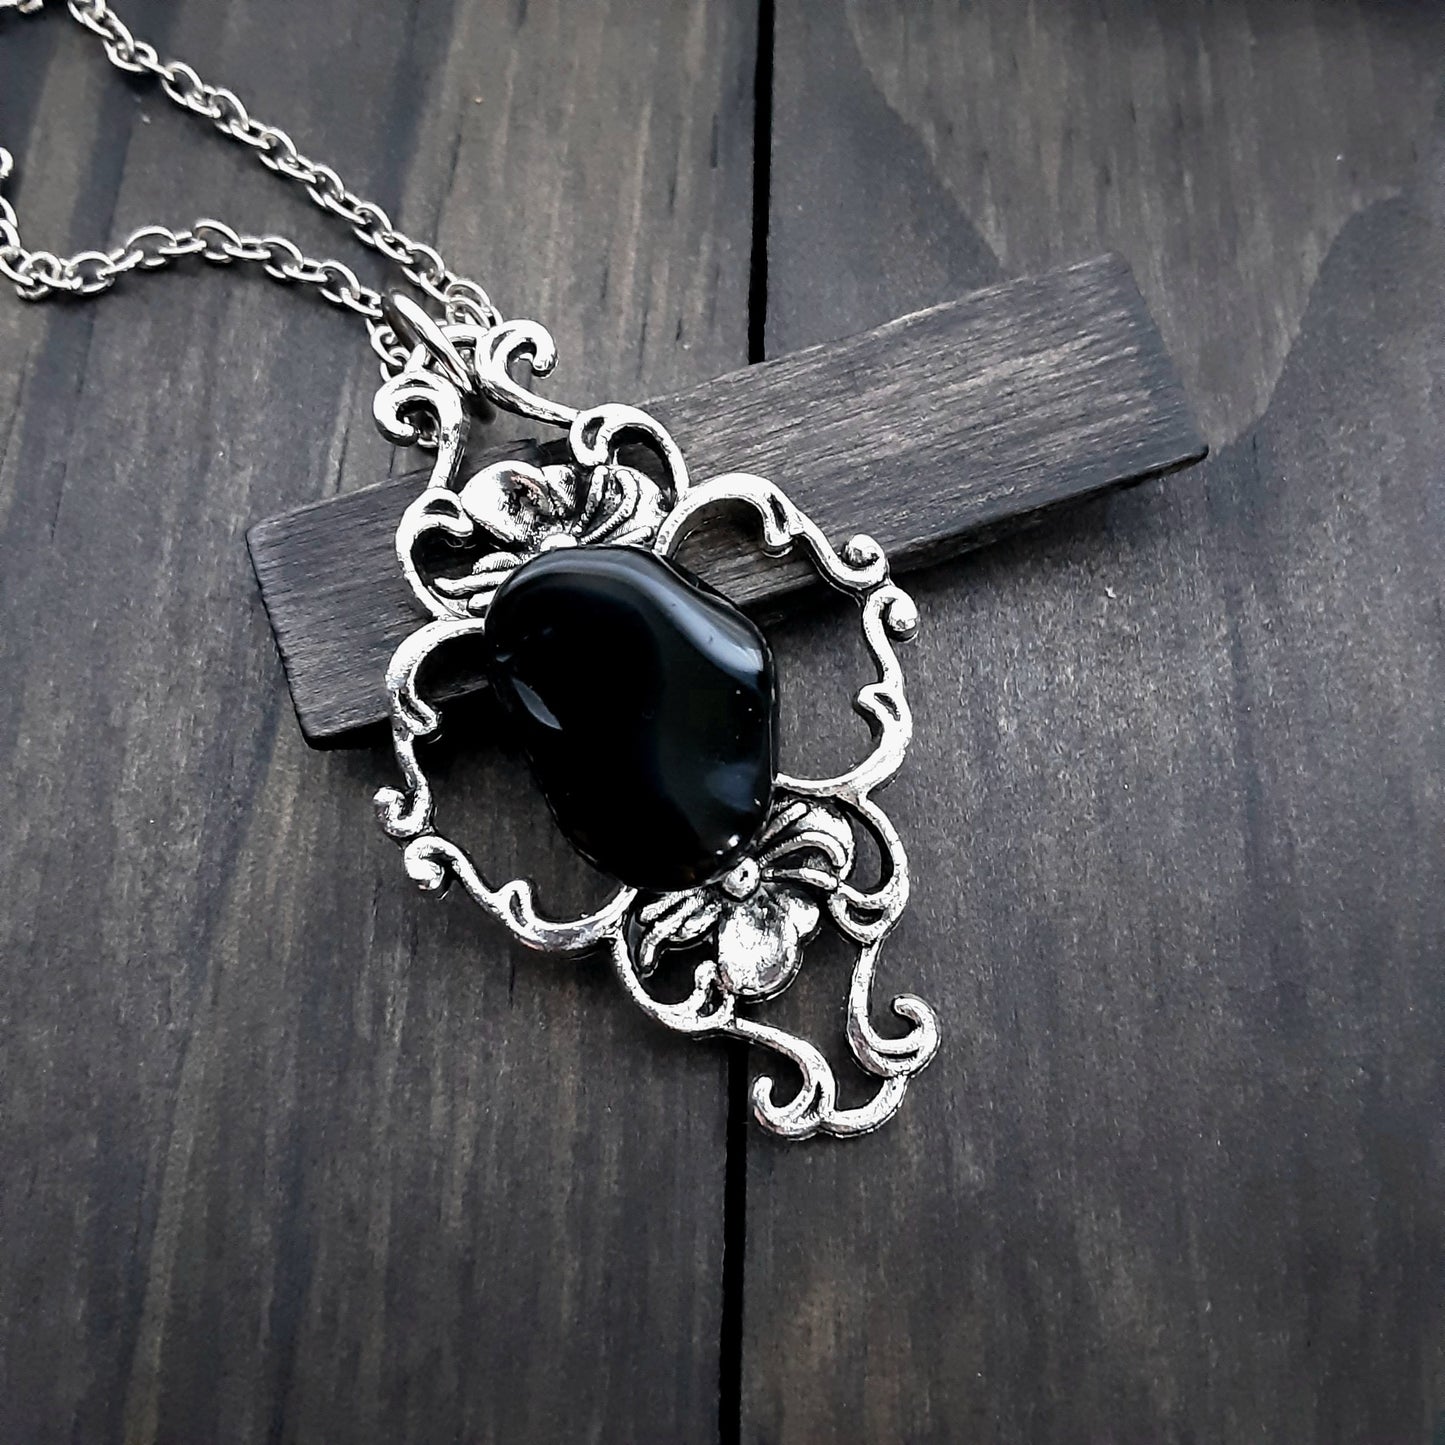 Obsidian Necklace Protection Witchcraft jewelry Gothic Dark Academia style pendant Vintage inspired Floral detailing